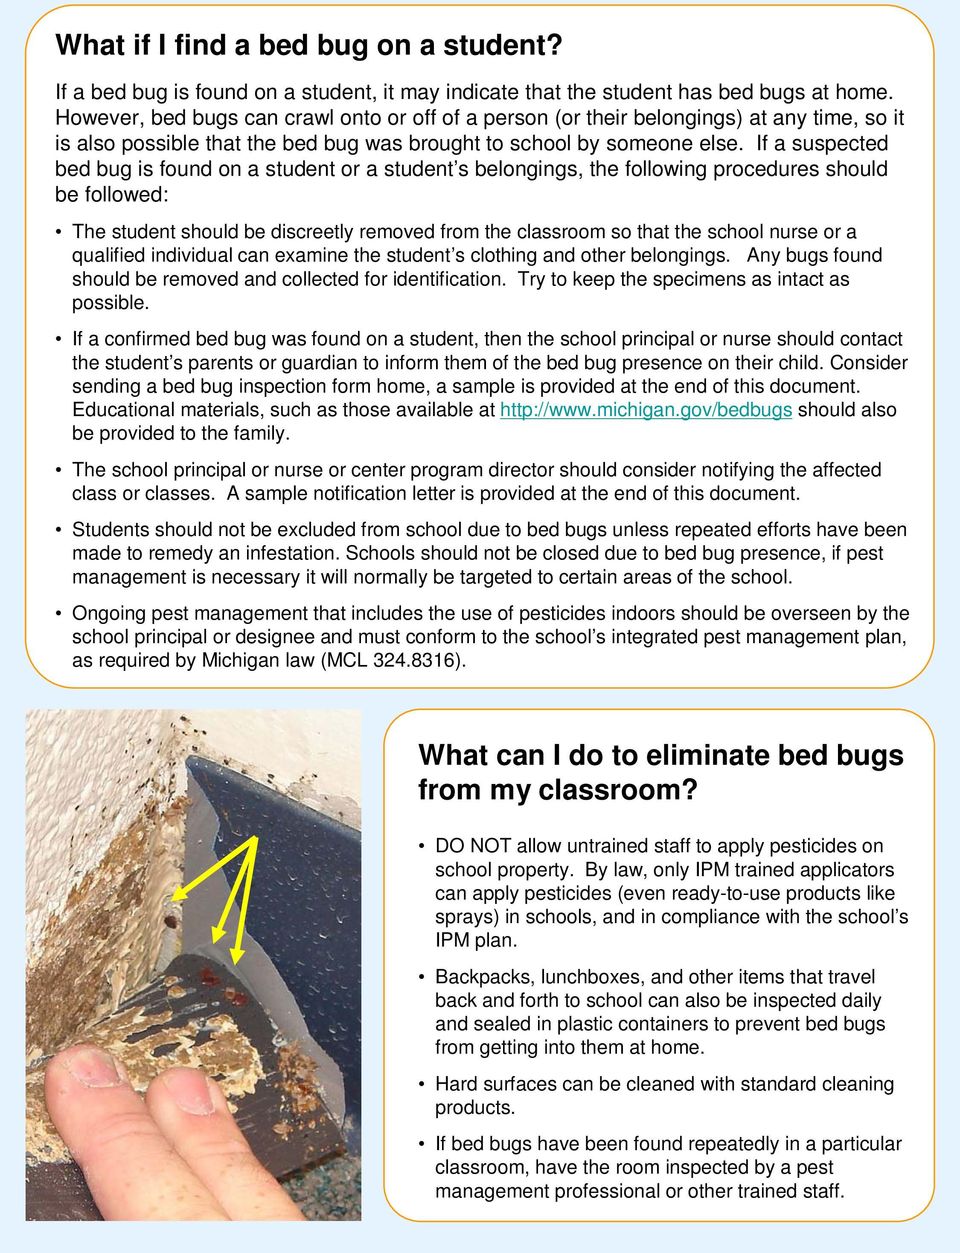 If a suspected bed bug is found on a student or a student s belongings, the following procedures should be followed: The student should be discreetly removed from the classroom so that the school